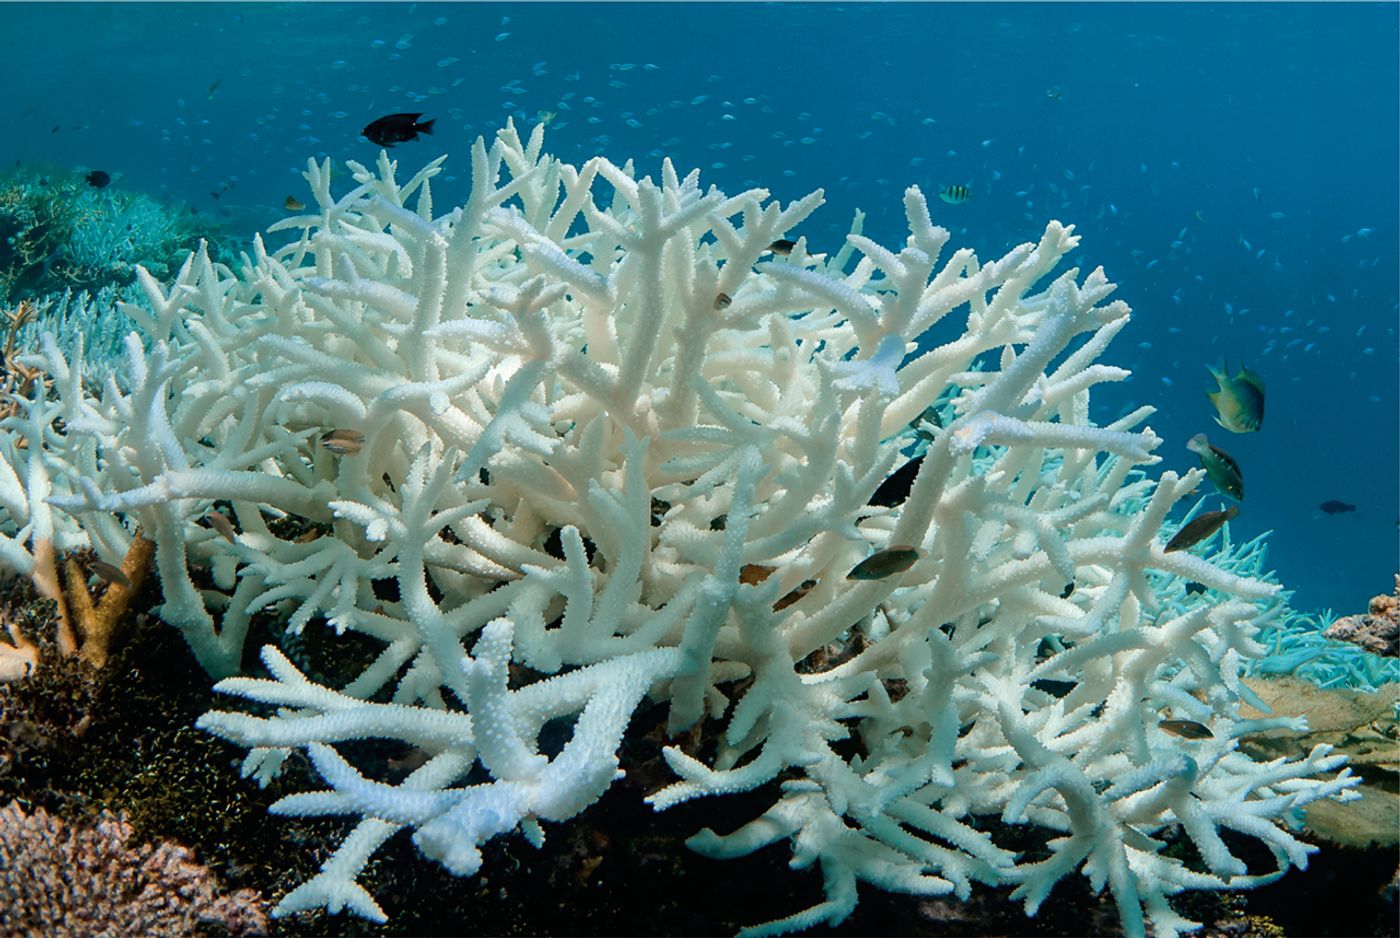 Bleached coral in the Maldives is shown in this image from Science